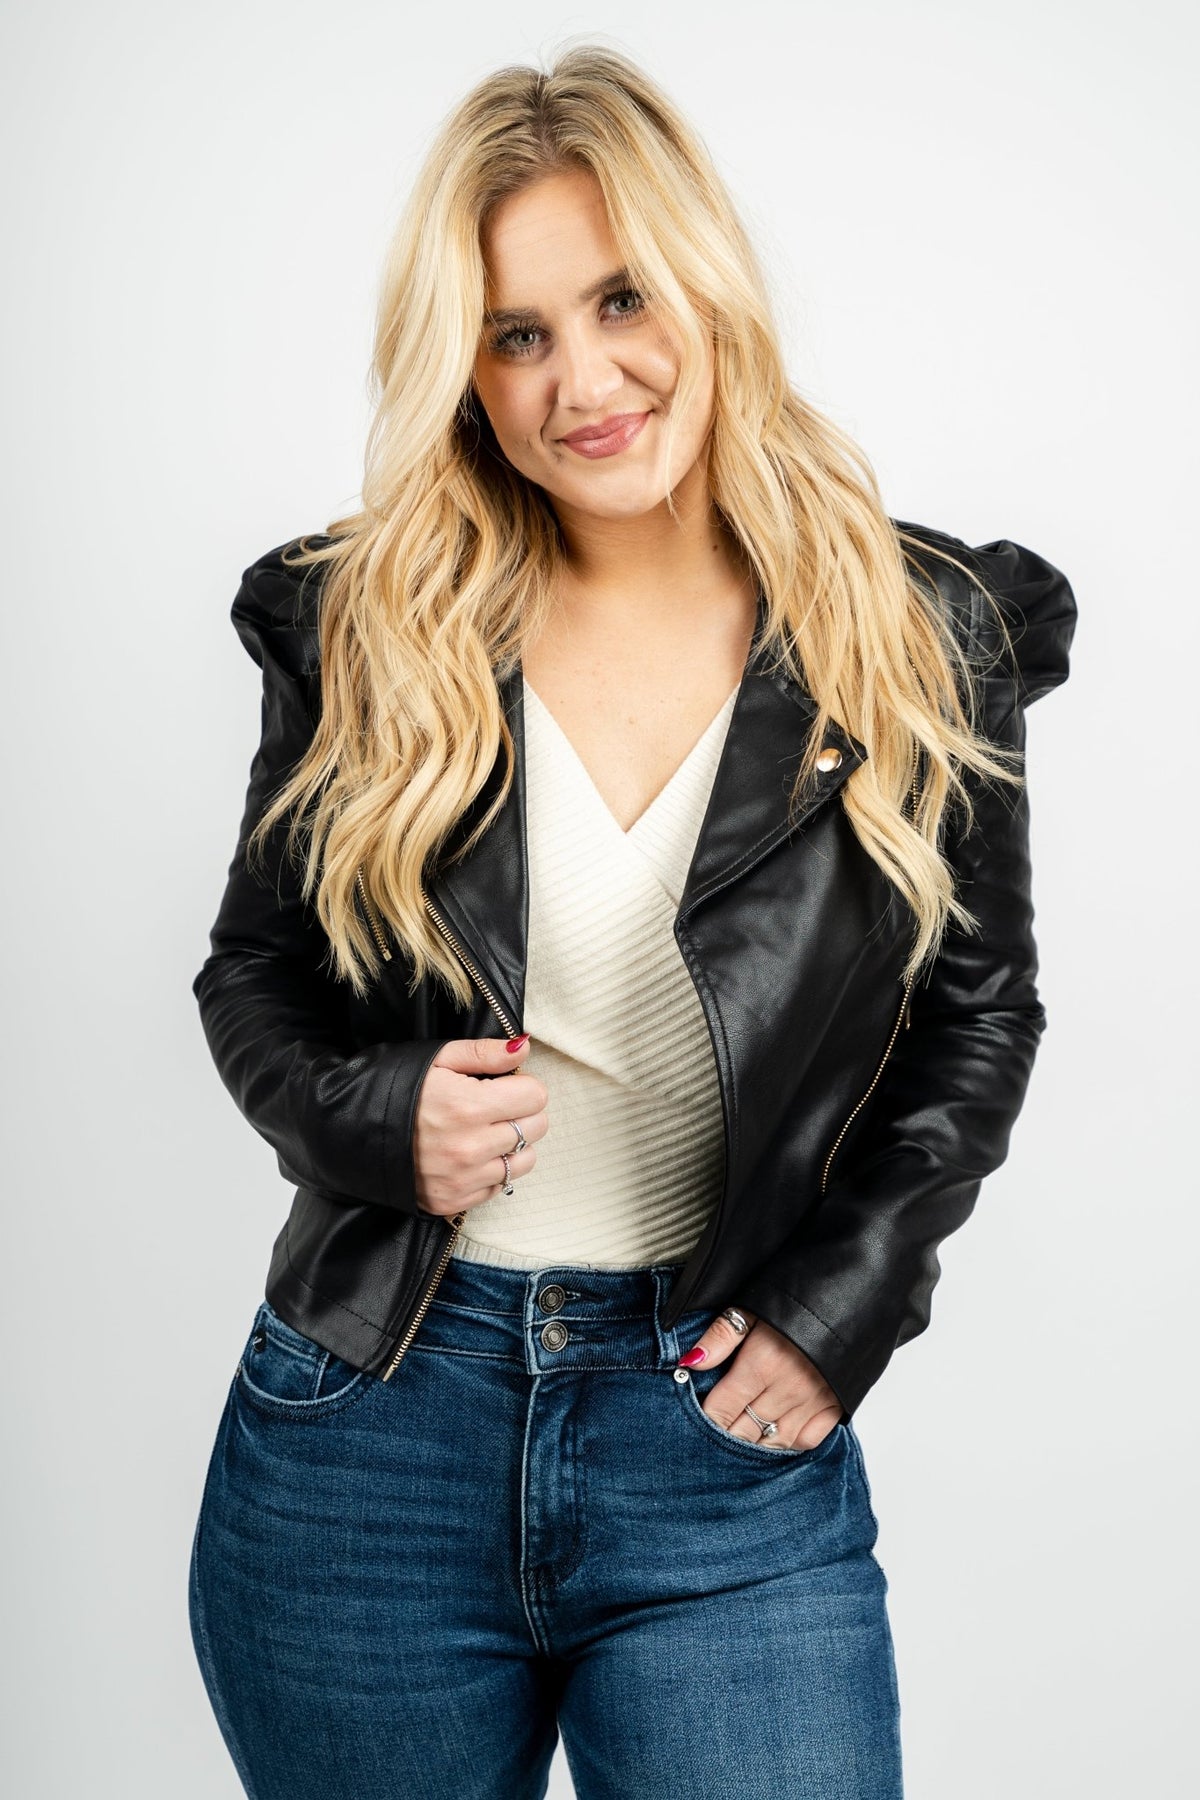 Puff Moto jacket black - Cute jacket - Trendy Jackets and Blazers at Lush Fashion Lounge Boutique in Oklahoma City